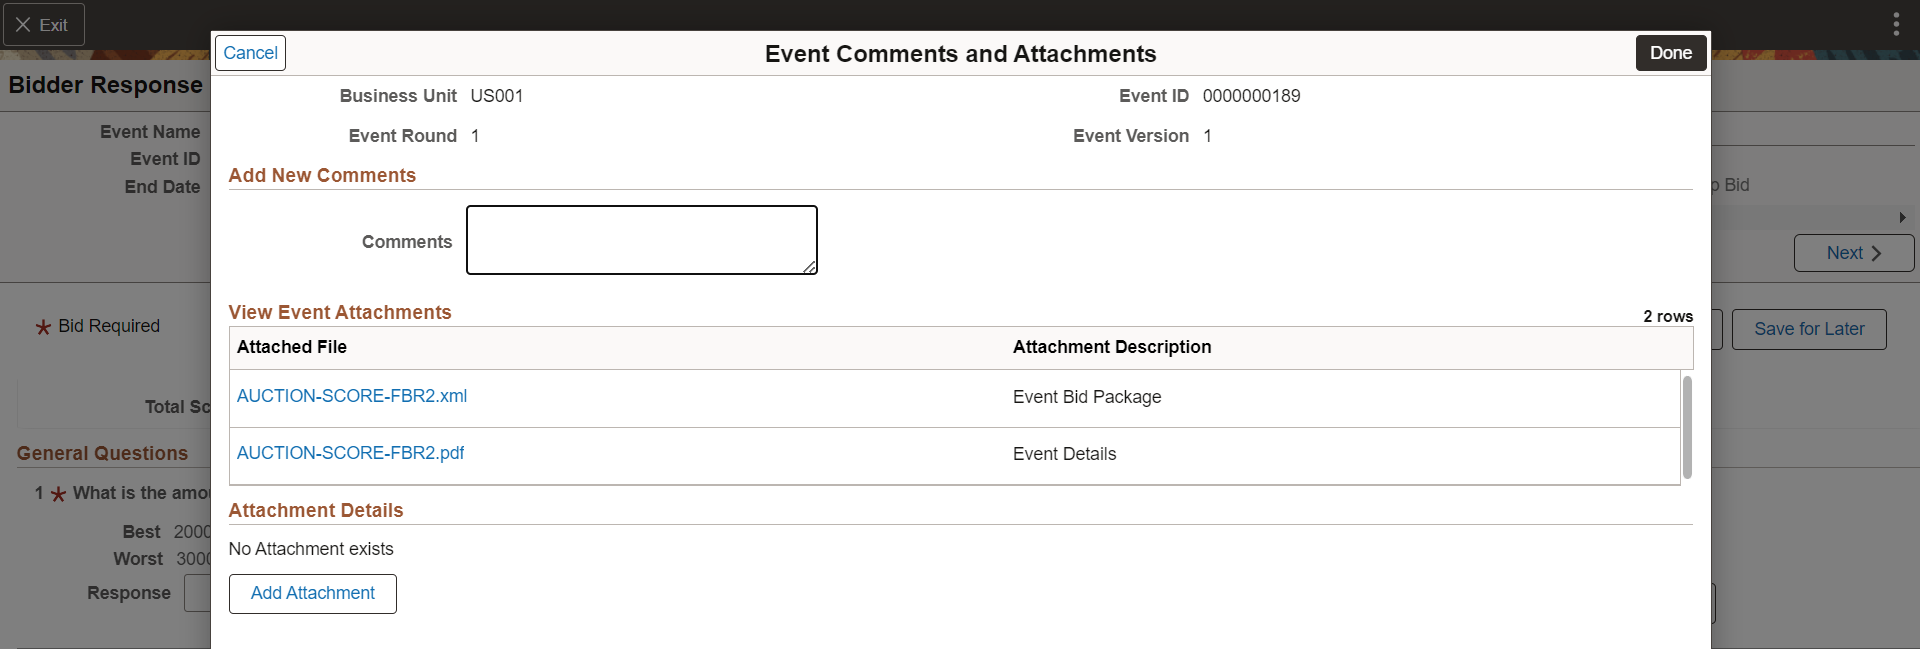 Event Comments and Attachments